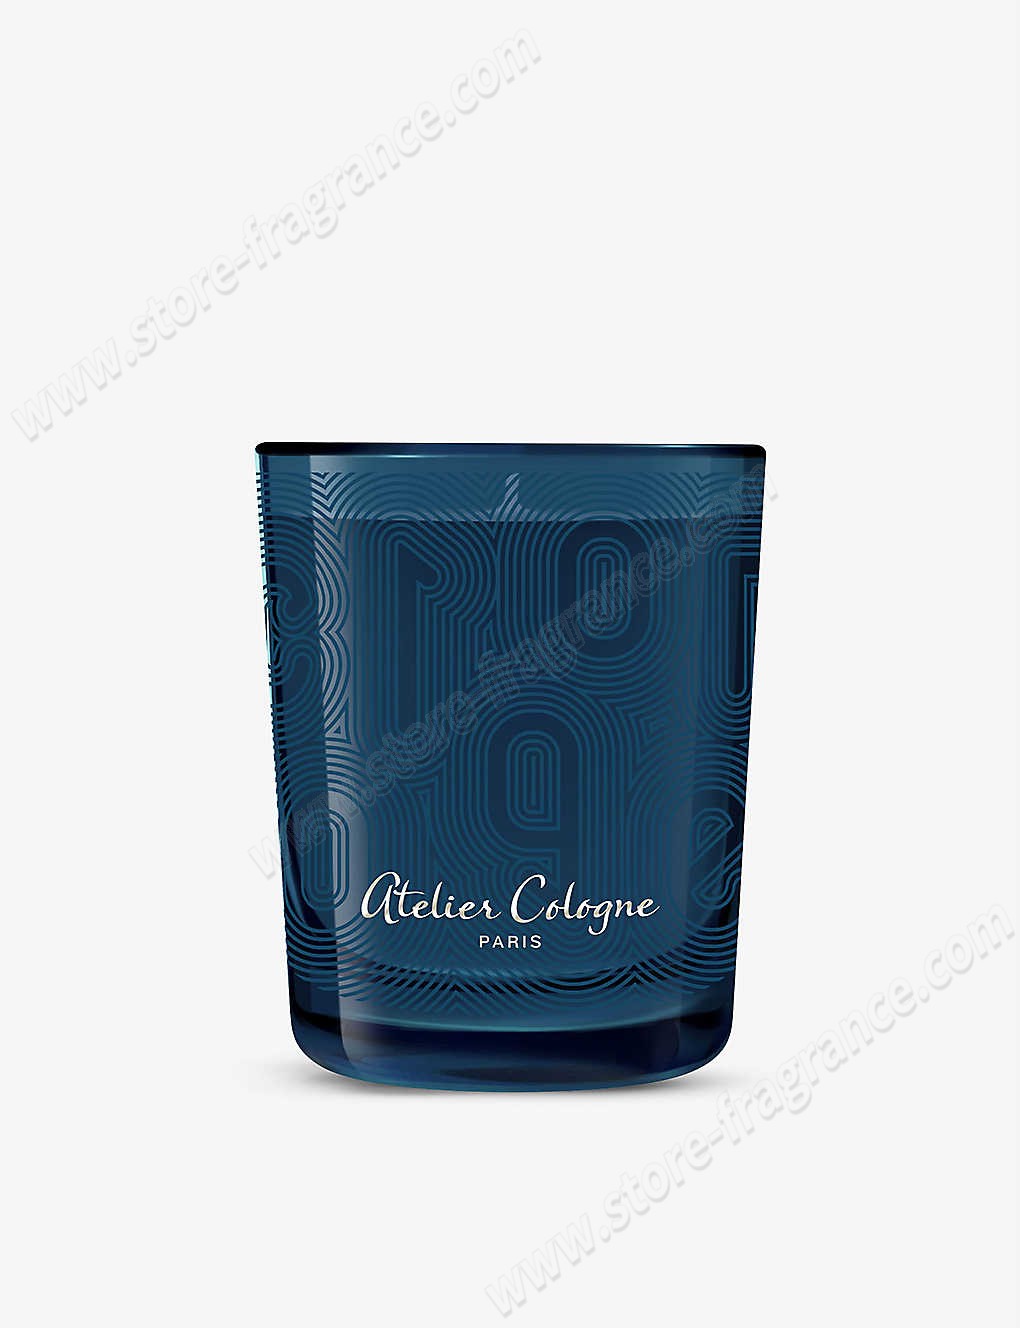 ATELIER COLOGNE/Orange Toscana scented candle 180g ✿ Discount Store - ATELIER COLOGNE/Orange Toscana scented candle 180g ✿ Discount Store